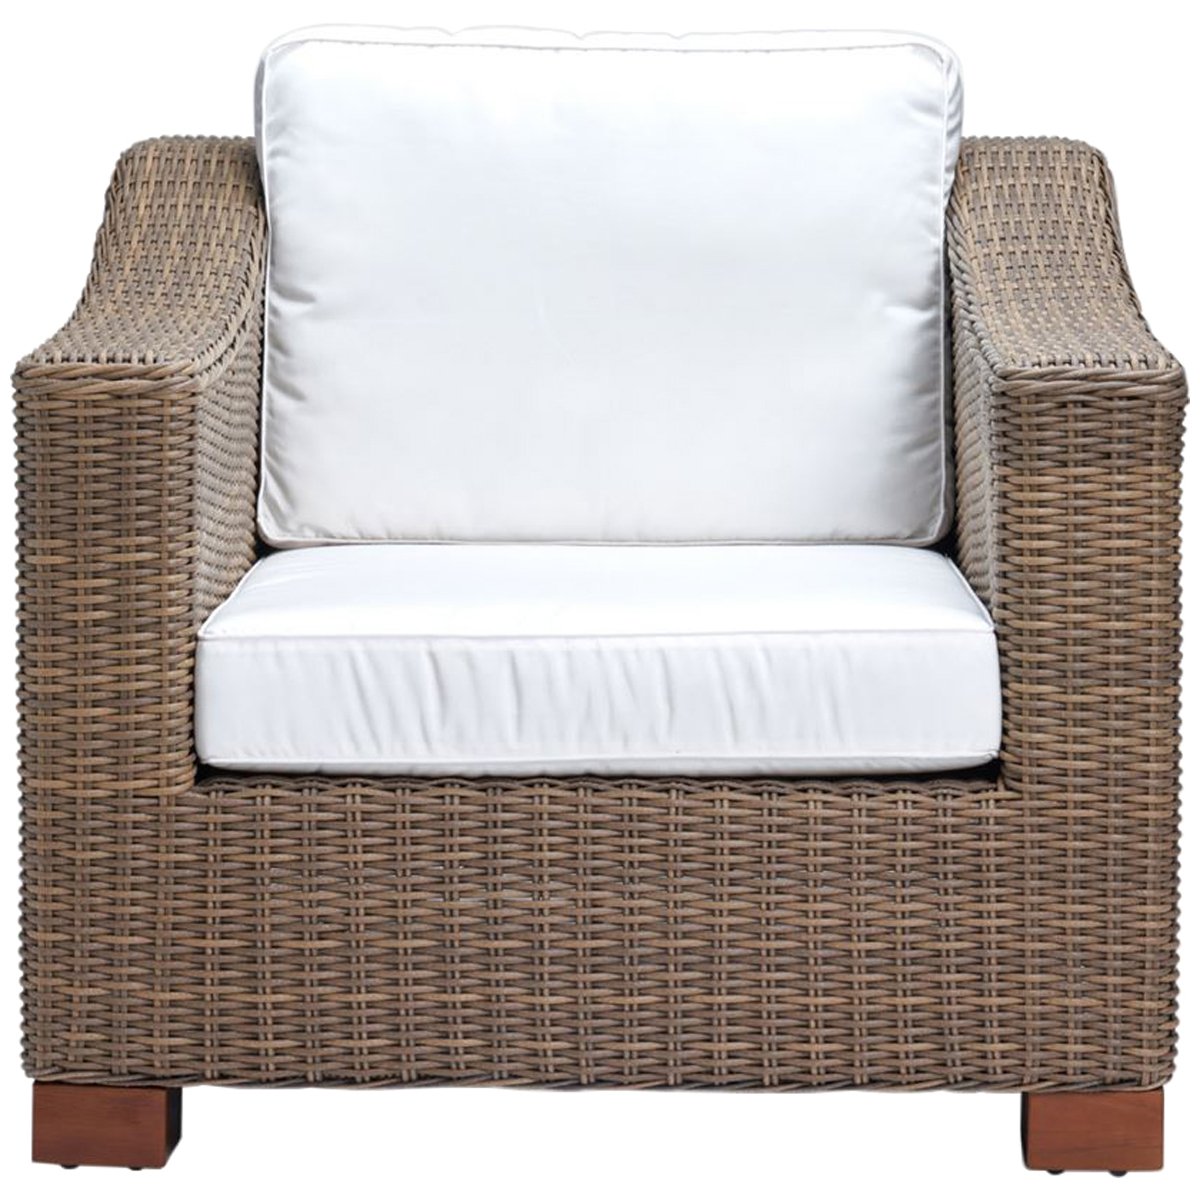 Made Goods Marina Faux Wicker Outdoor Lounge Chair in Garonne Leather